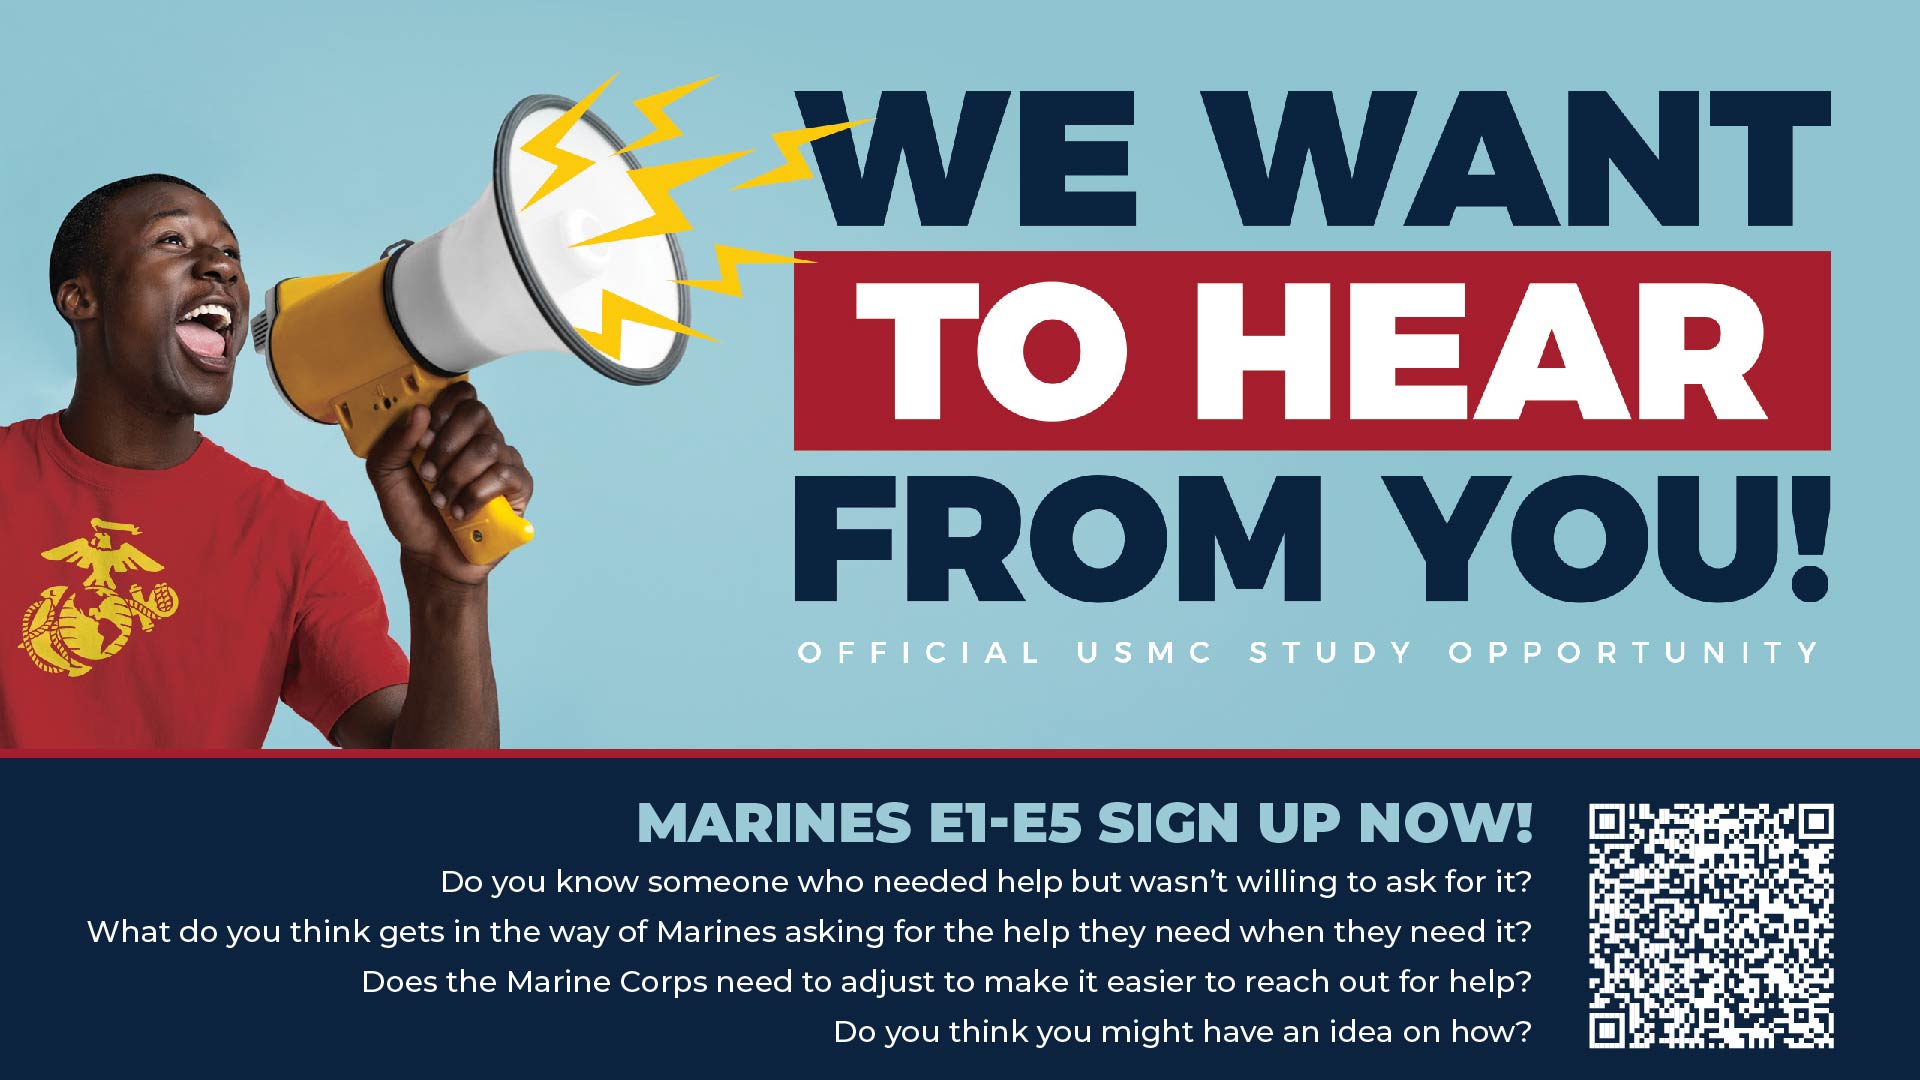 Official USMC Study Opportunity for Marines